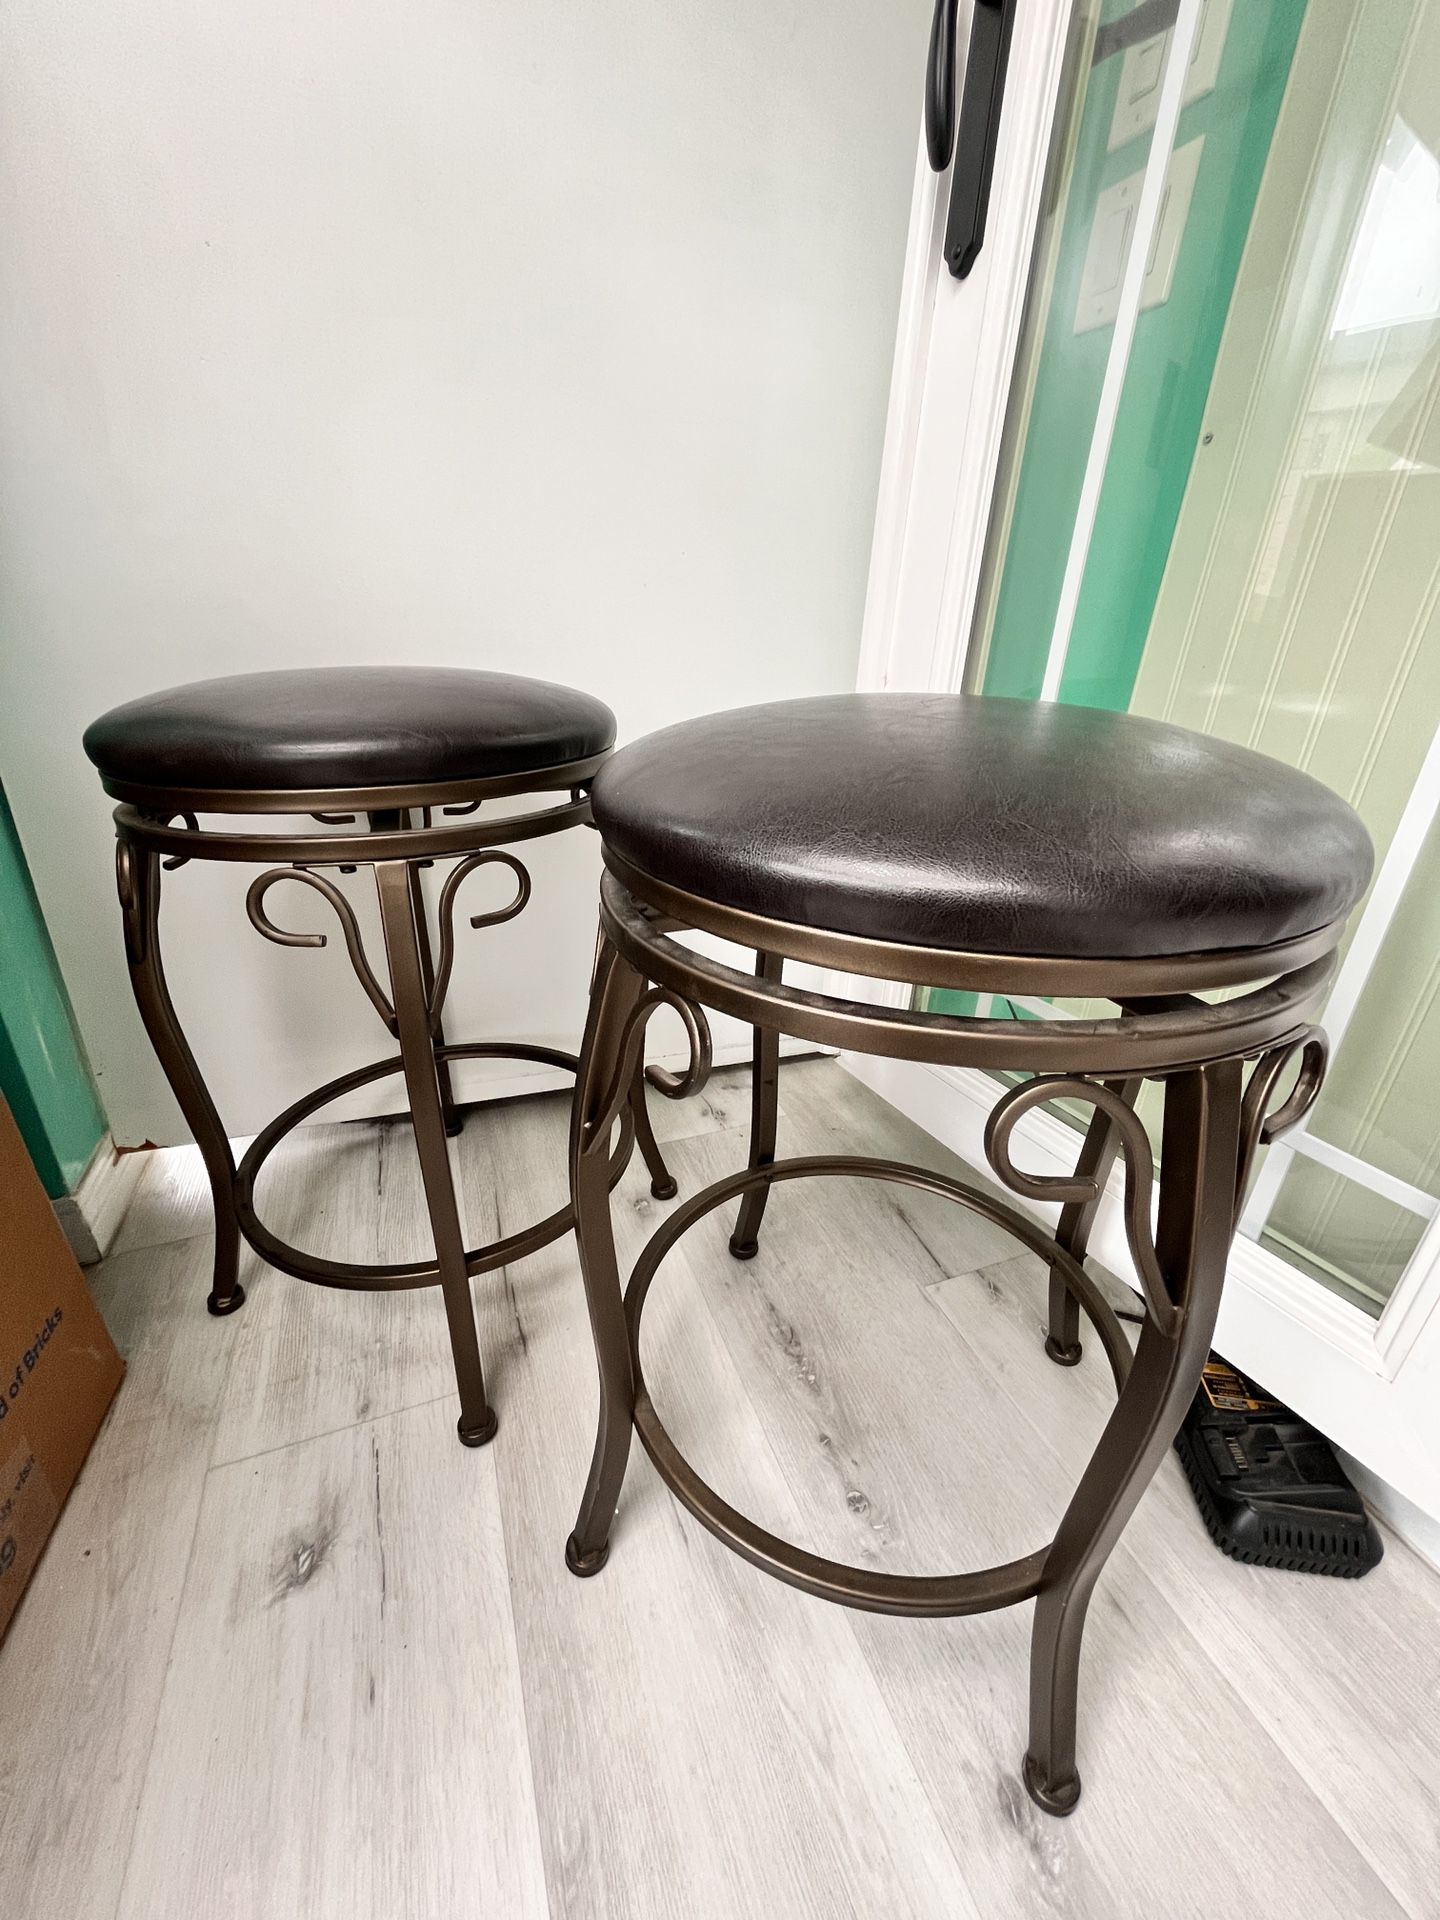 Bar chair stool New condition